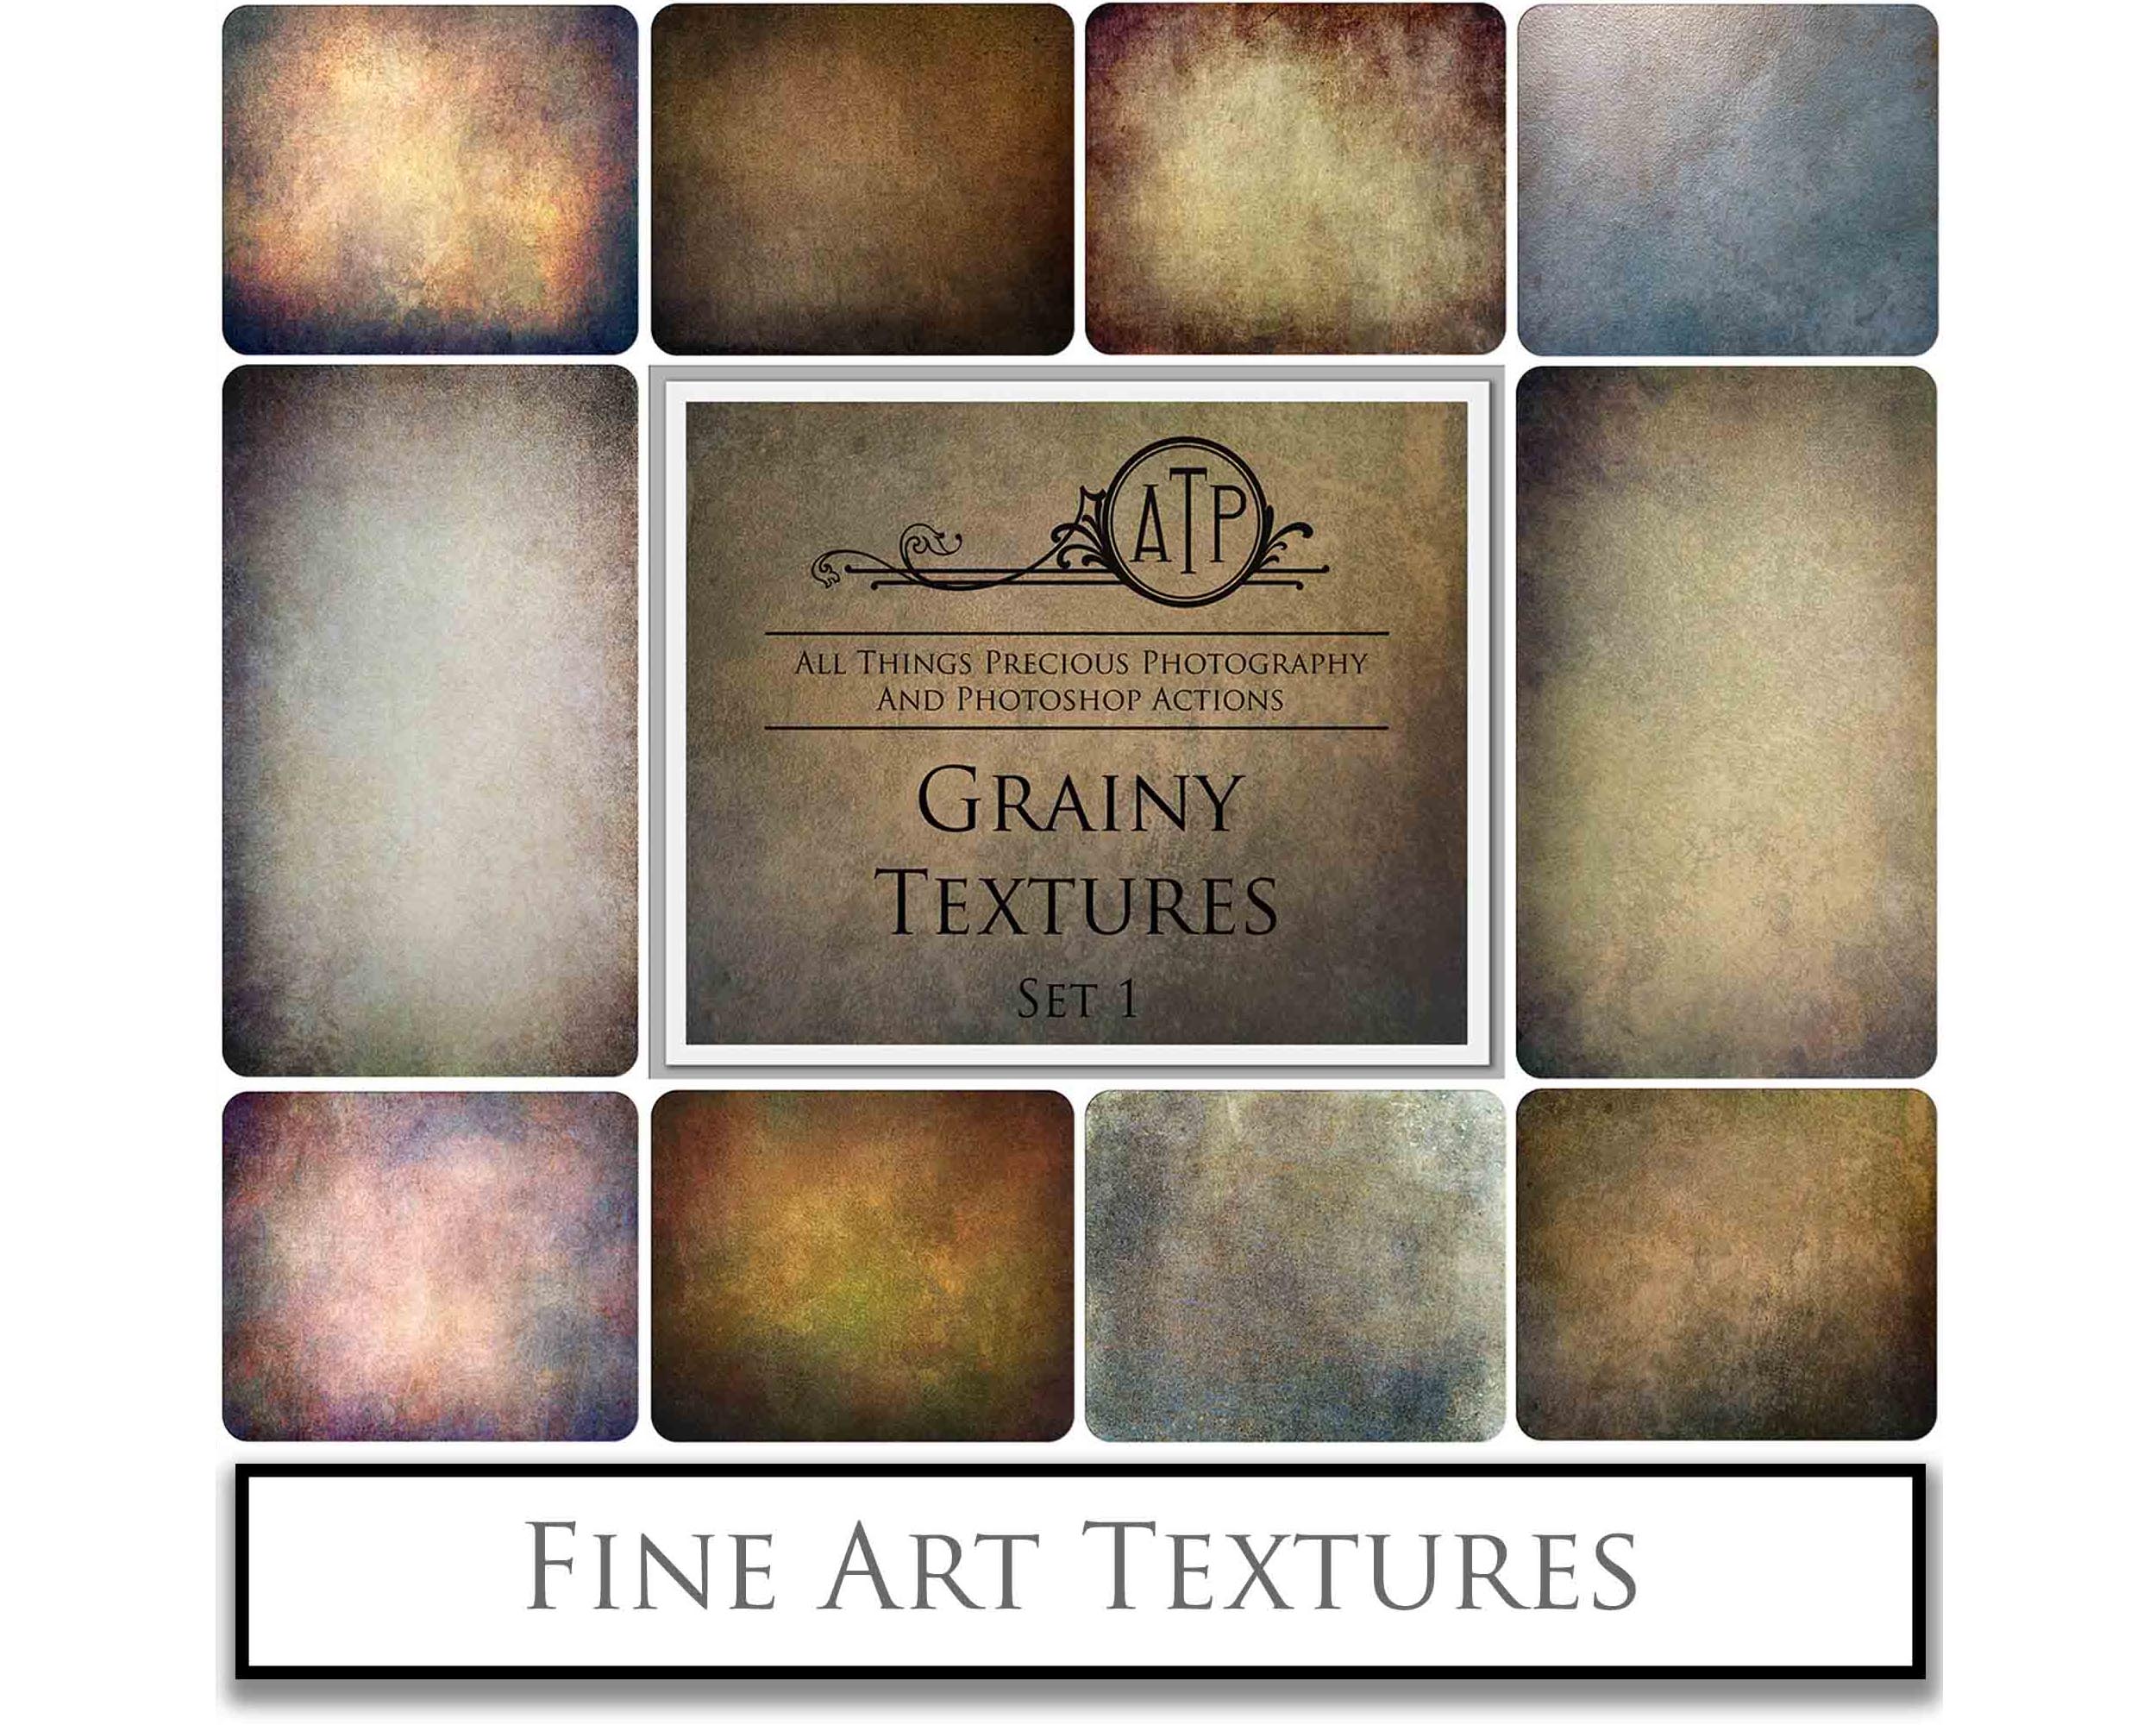 Warm fine art textures. Rich, Golden colour tints. Texture for photographers and digital editing. Photo Overlays. Antique, Vintage, Grunge, Light, Dark Bundle. Textured printable Canvas, Colour, Monochrome, Bundle. High resolution, 300dpi Graphic Assets for photography, digital scrapbooking and design. By ATP Textures